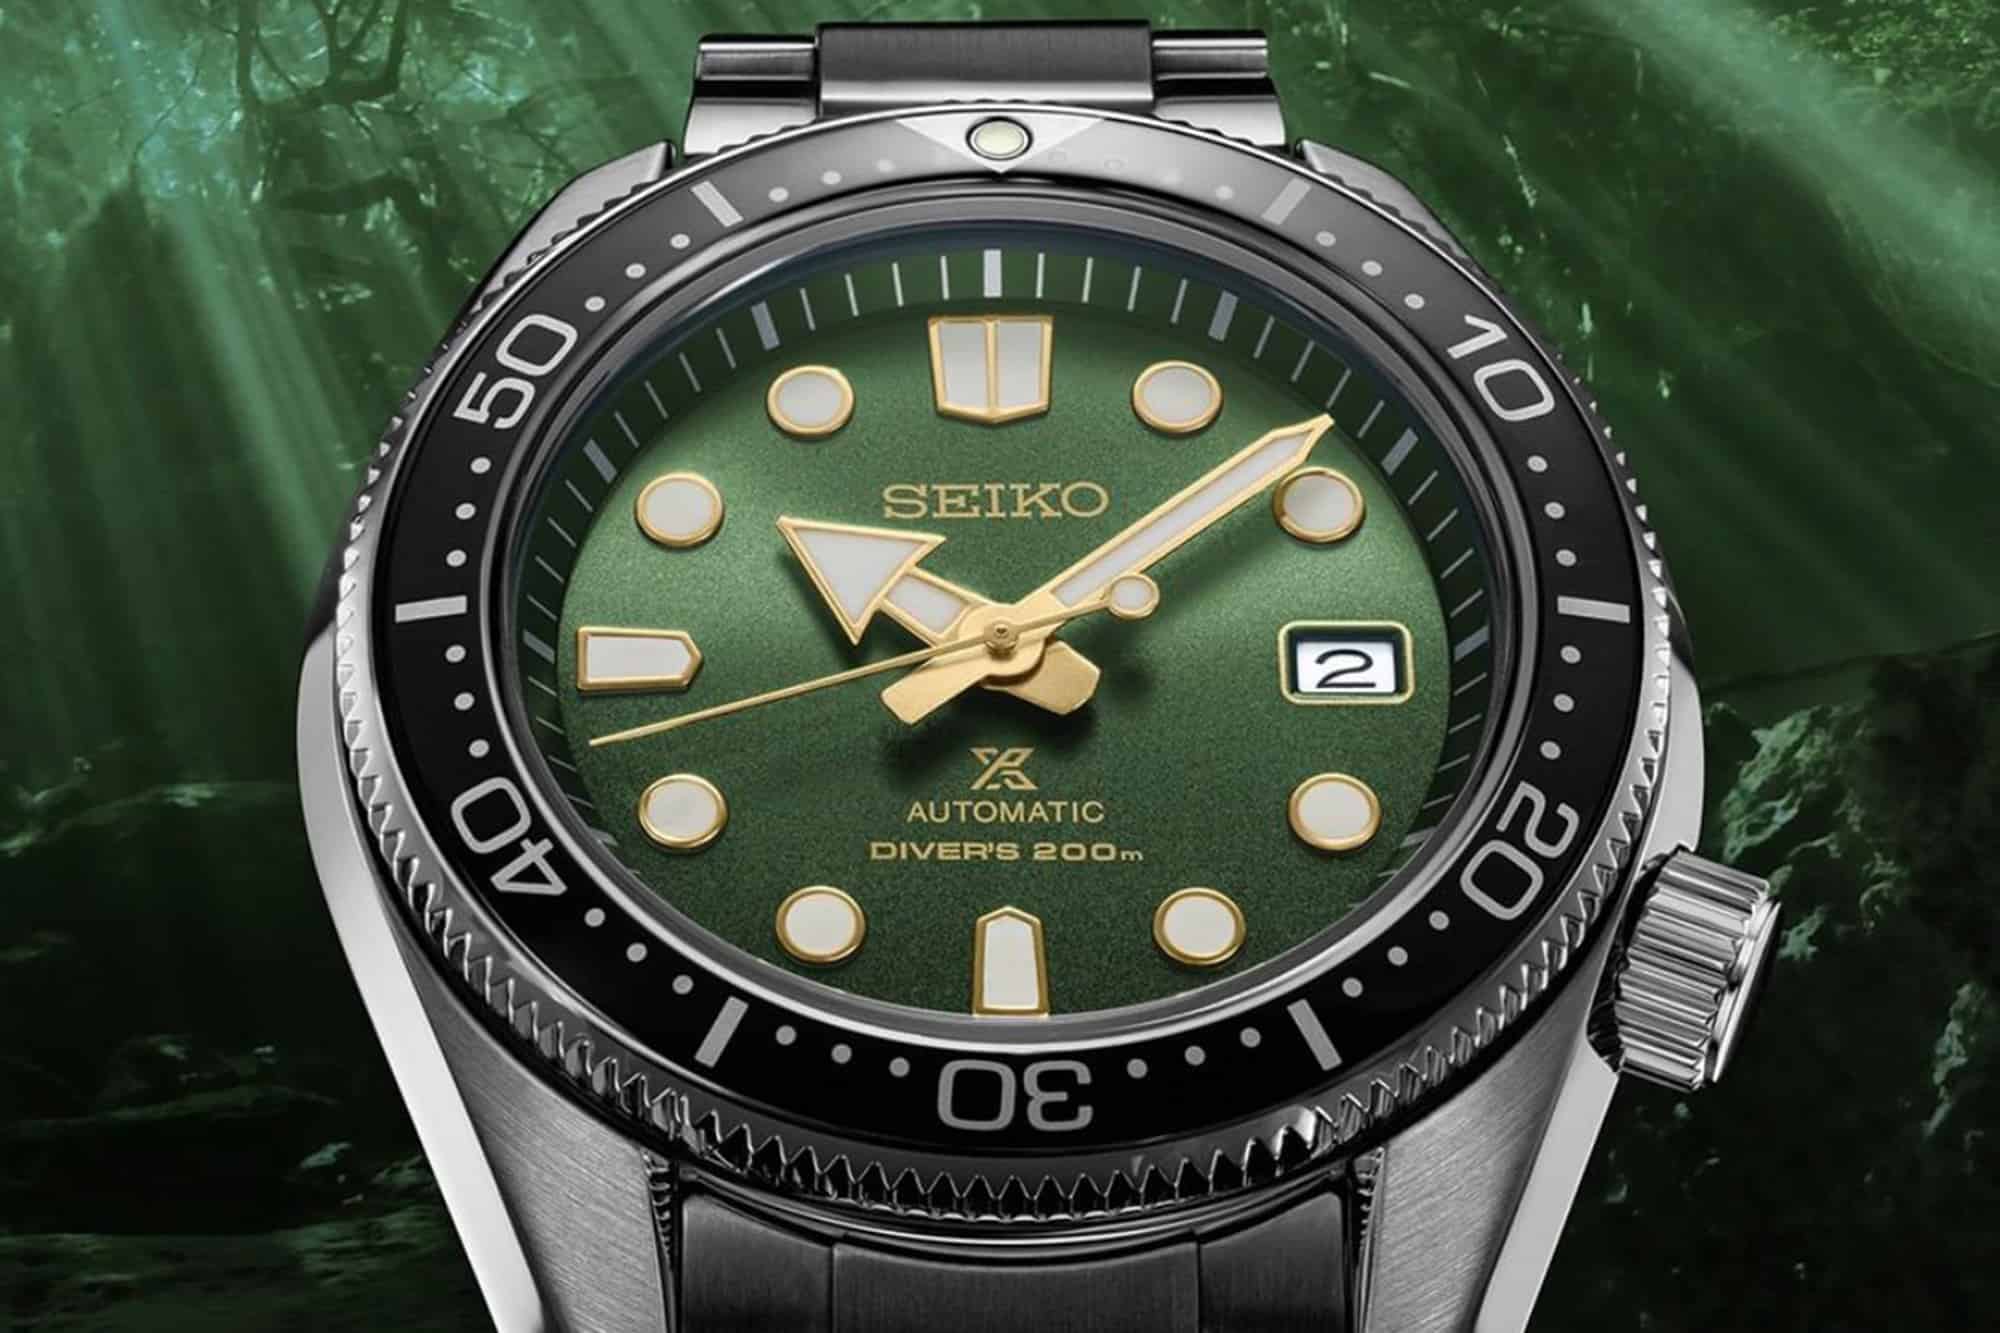 Introducing the Seiko Prospex 200m Diver Ref. SPB105 with Green Dial and Gold Accents